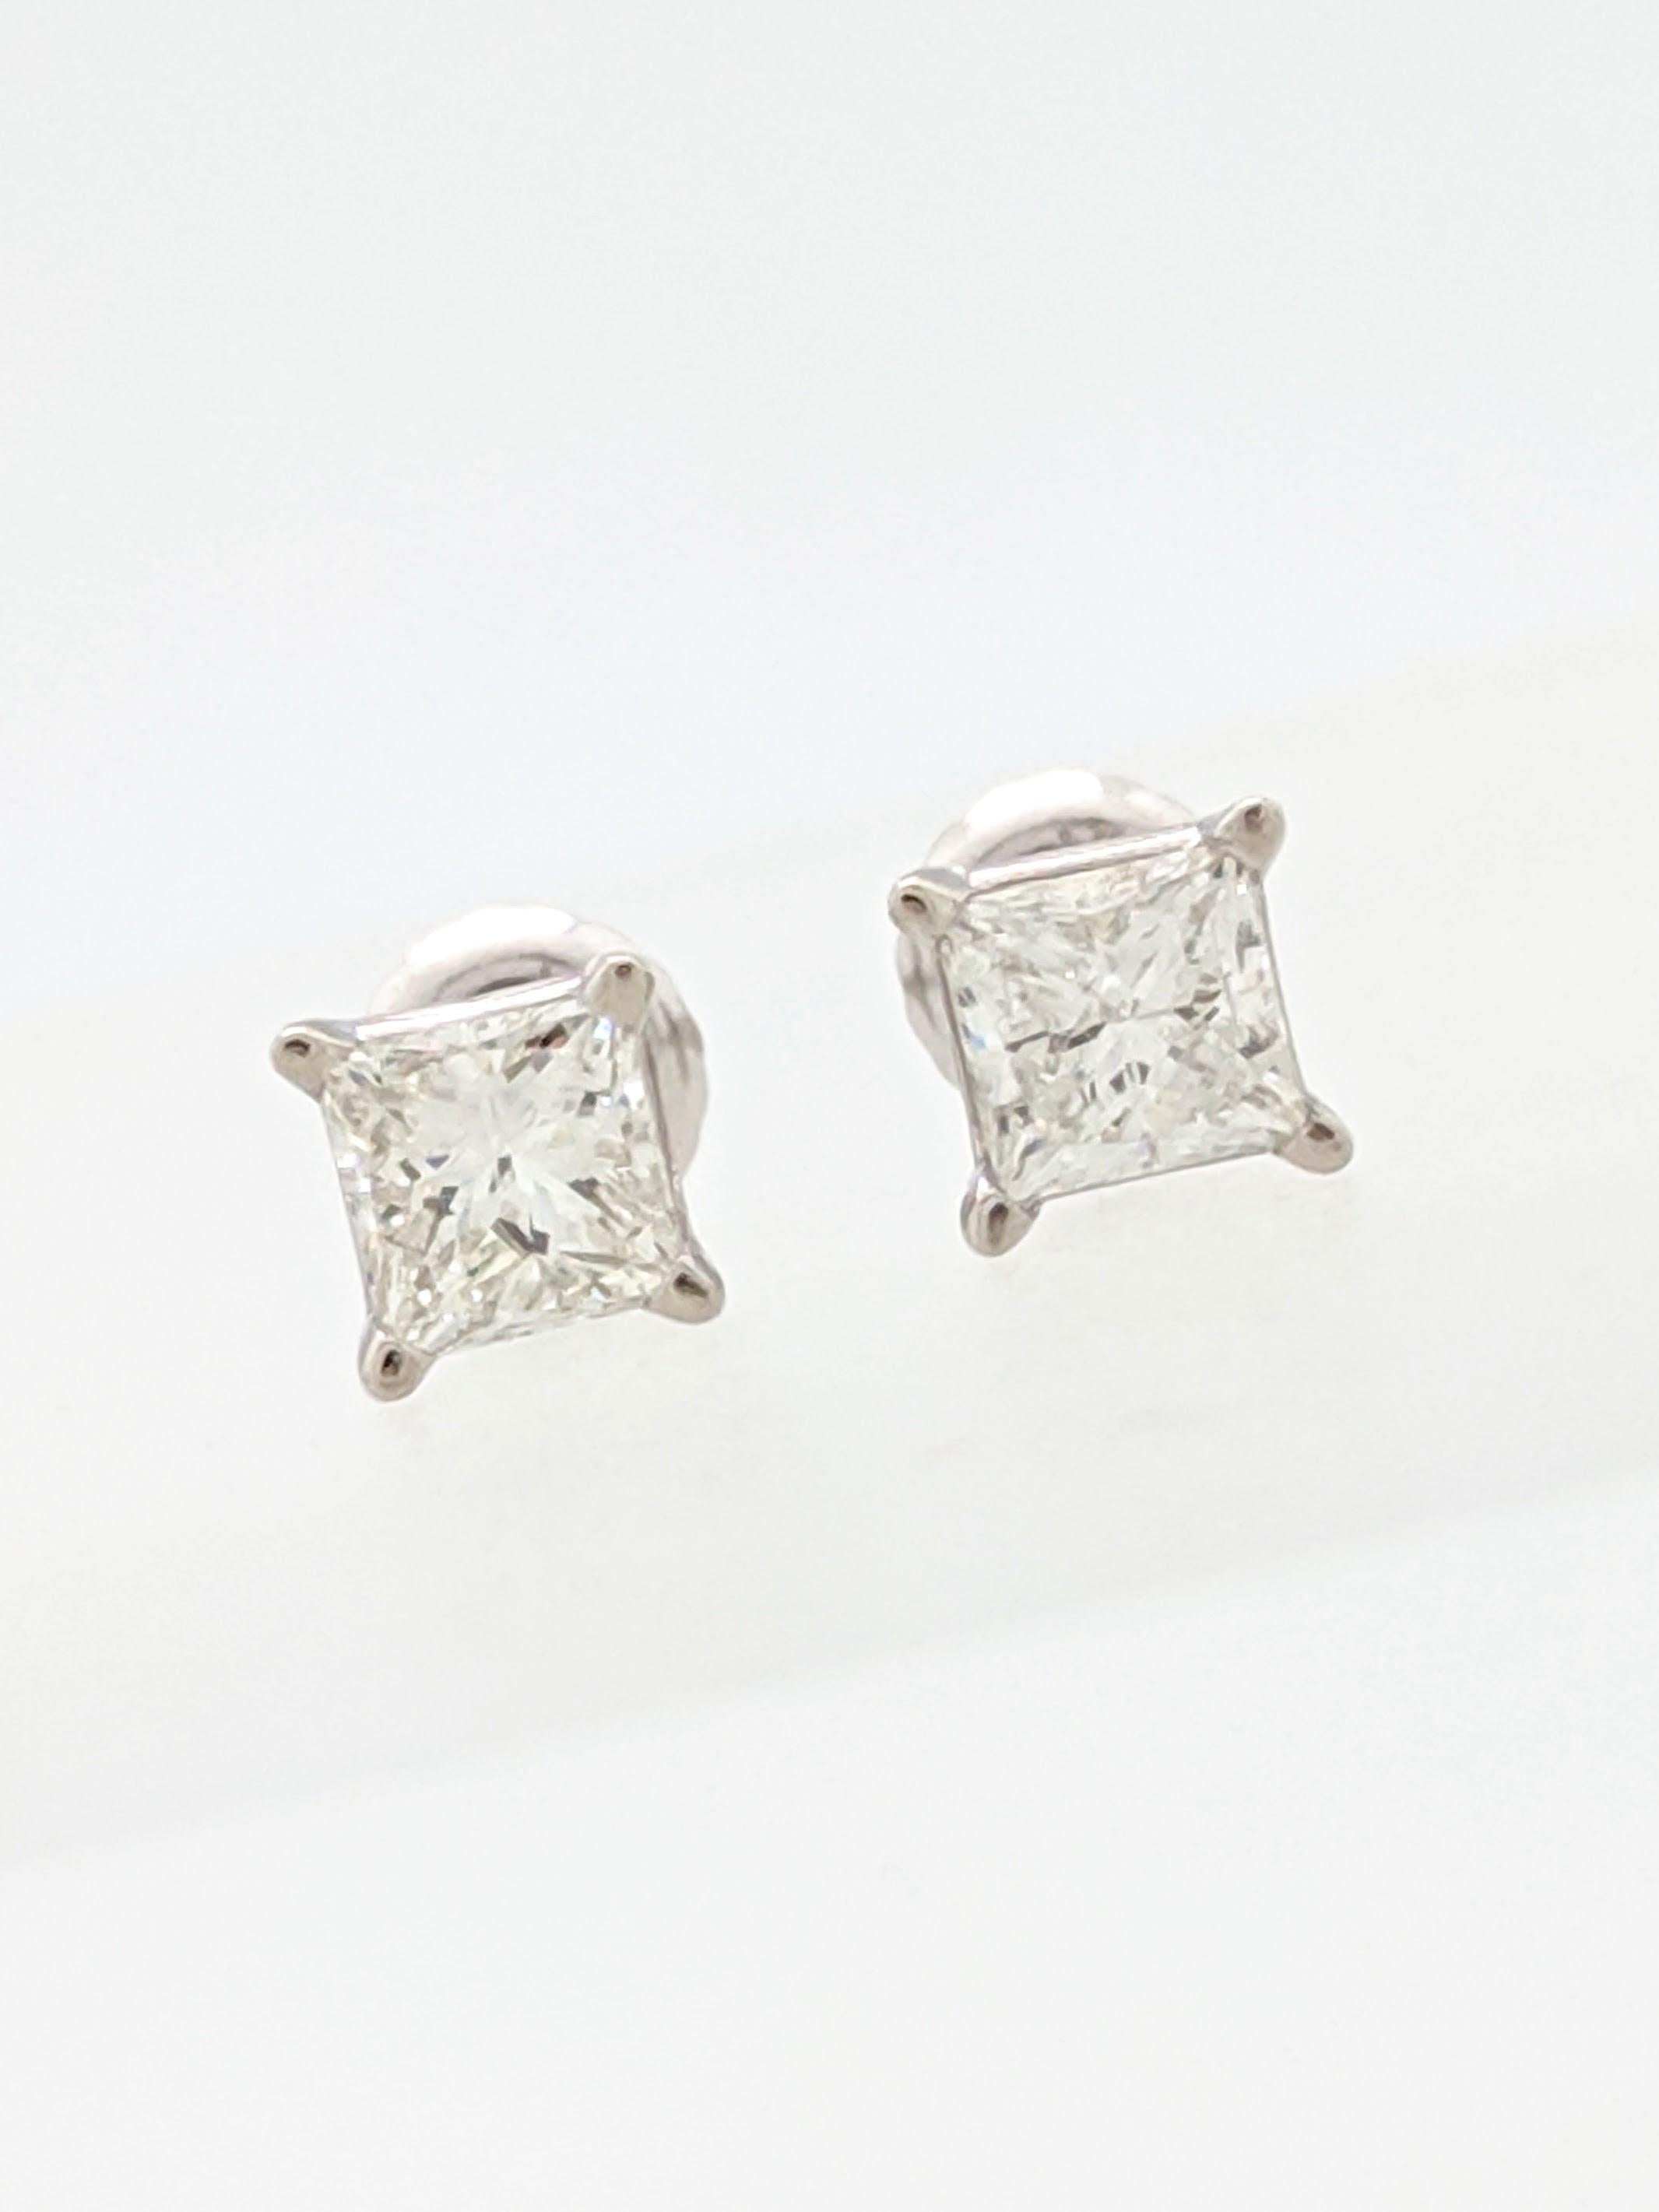 14k White Gold 1ctw Princess Cut Diamond Stud Screwback Earrings

You are viewing a Beautiful Pair of Diamond Stud Earrings.

These earrings are crafted from 14k white gold and weighs 1.1 grams. Each earring features approximately (1) 0.50ct natural